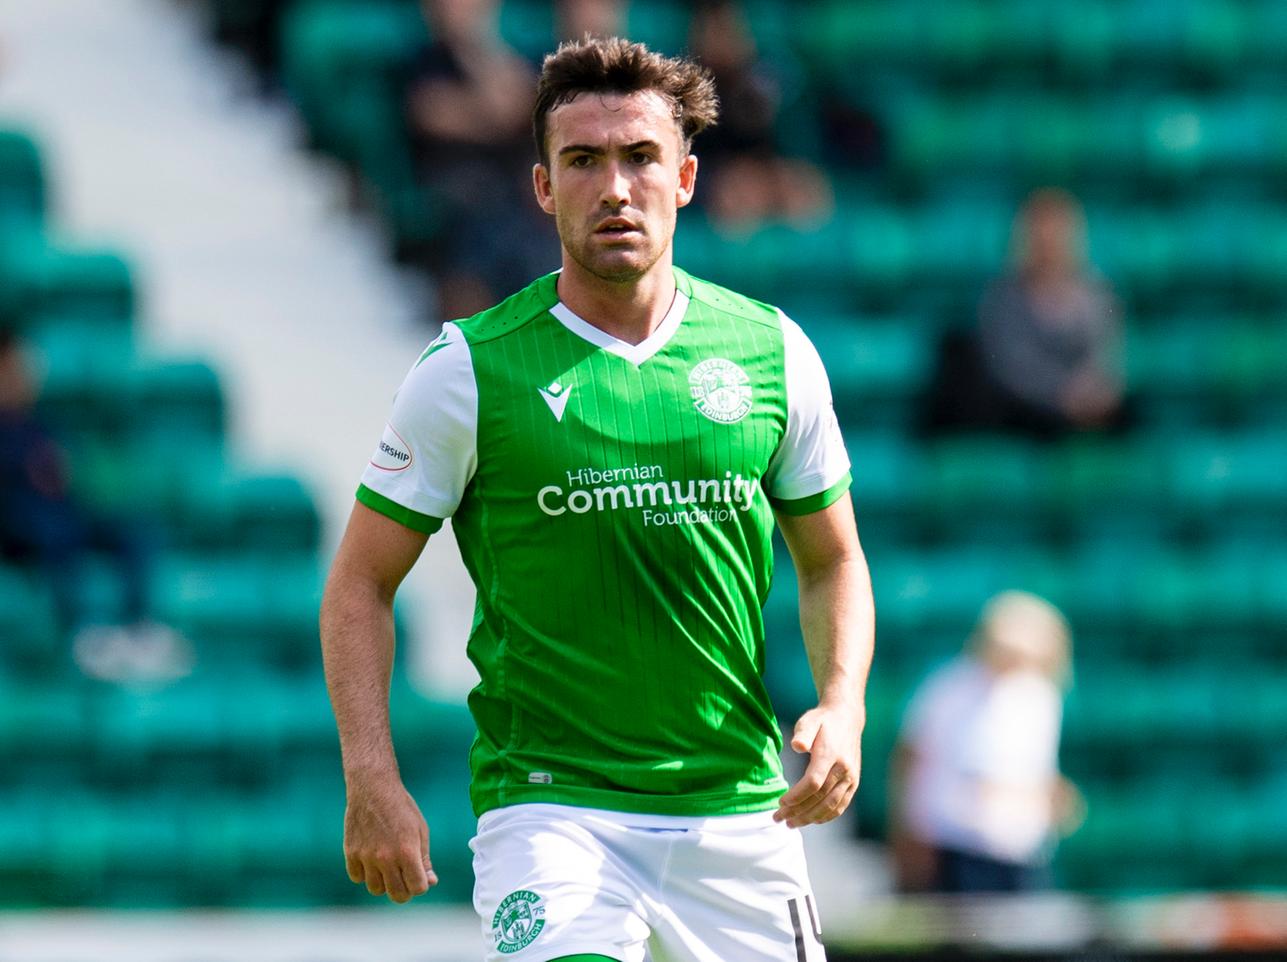 Played on the right in the first half and then became the sitting midfielder after the break. Had some impressive moments as Hibs got on top but also made some slack passes.